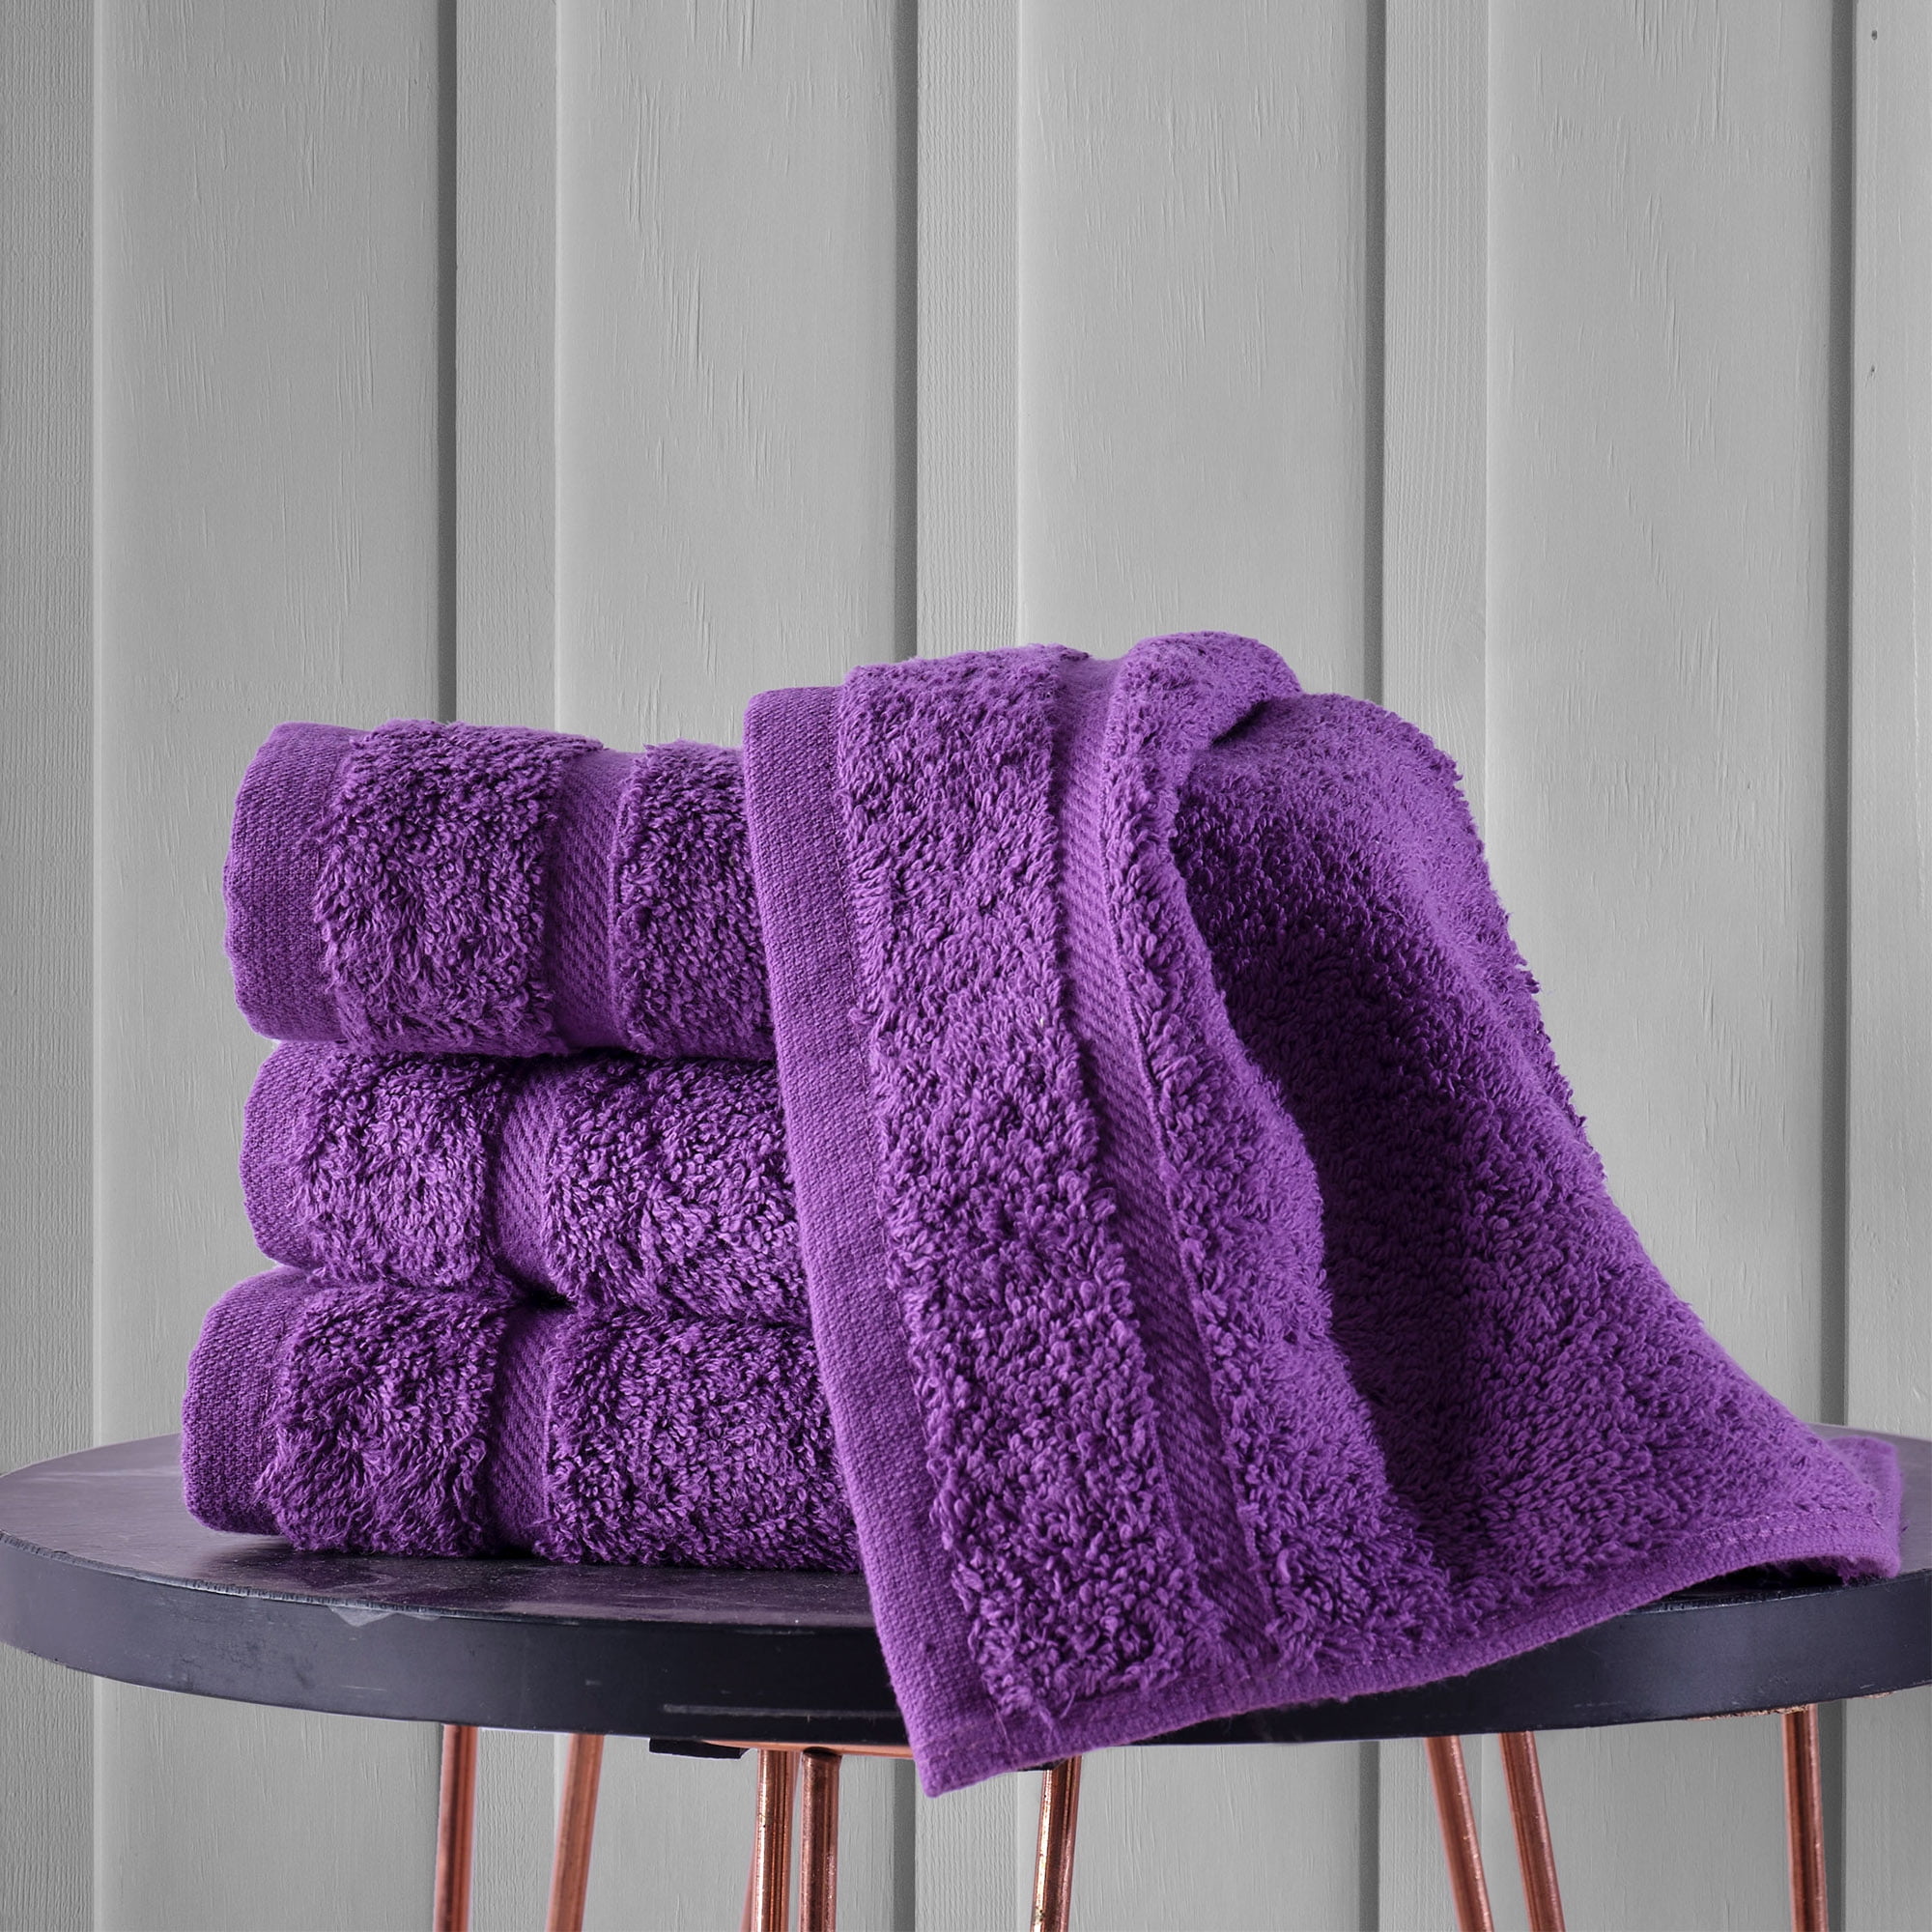 Soft Towels Extra Large Hand Washing Body Towels Whole Pure Cotton - Luxurious Rayon Trim, Size: 34, Purple